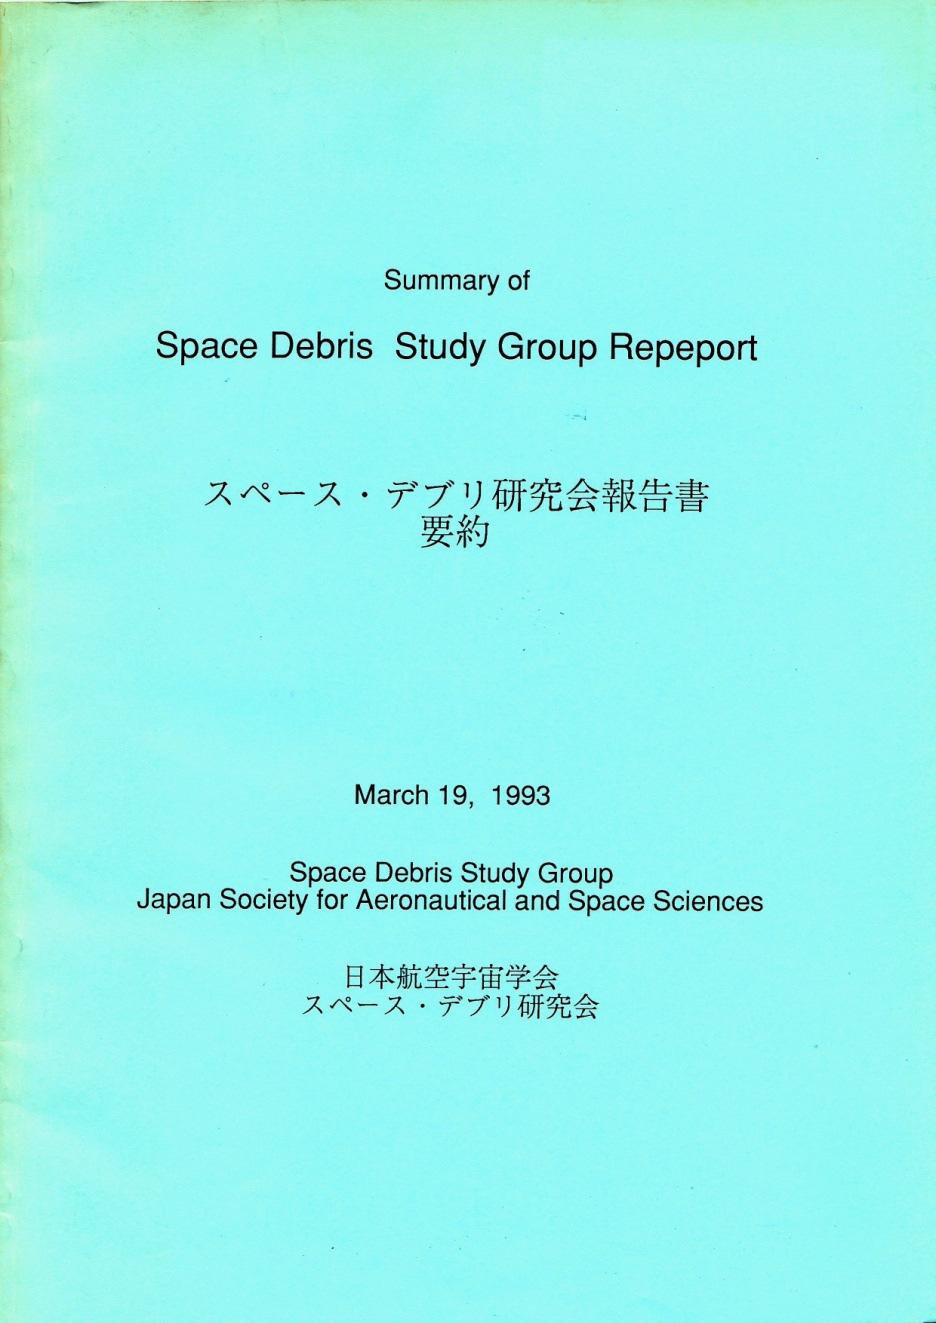 Space Debris Study Group Report, 1993 Japan Society for Aeronautical & Space Sciences(JSASS) Contents 1. Background 2. Space Debris Environment 3.